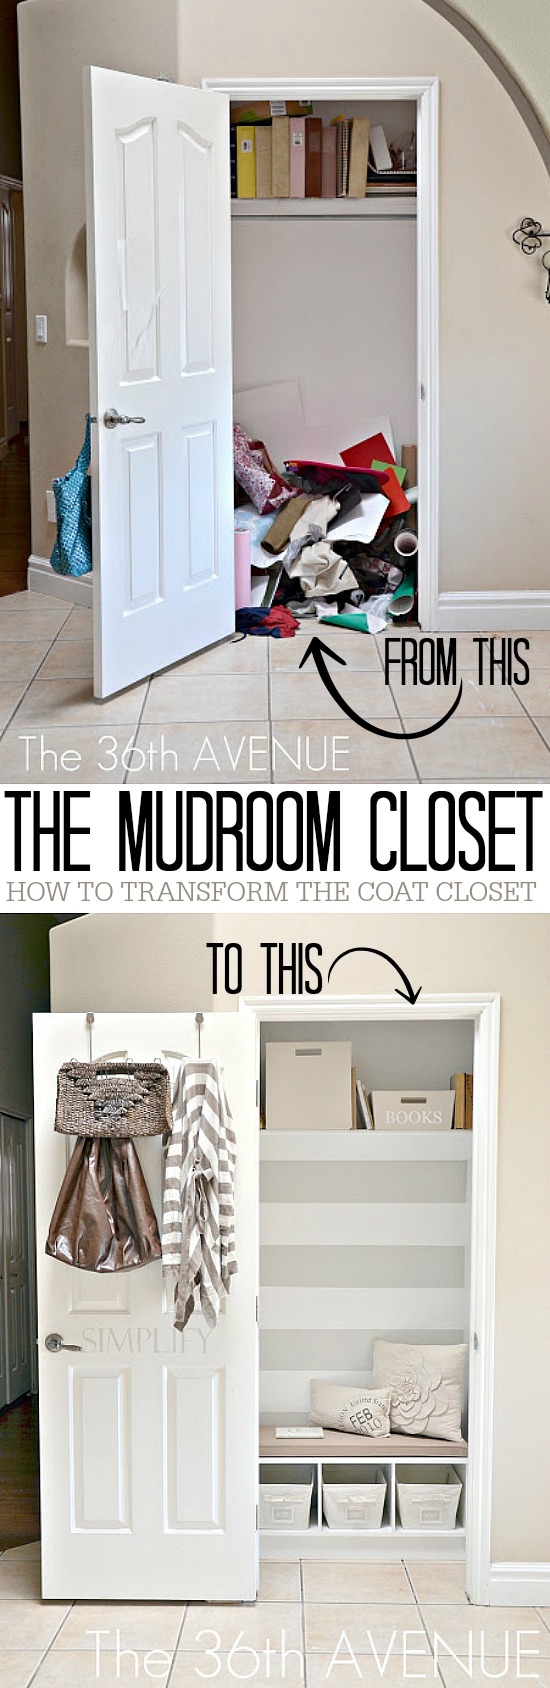 5 Ideas for Converting Your Extra Closet Into an Office, Mudroom